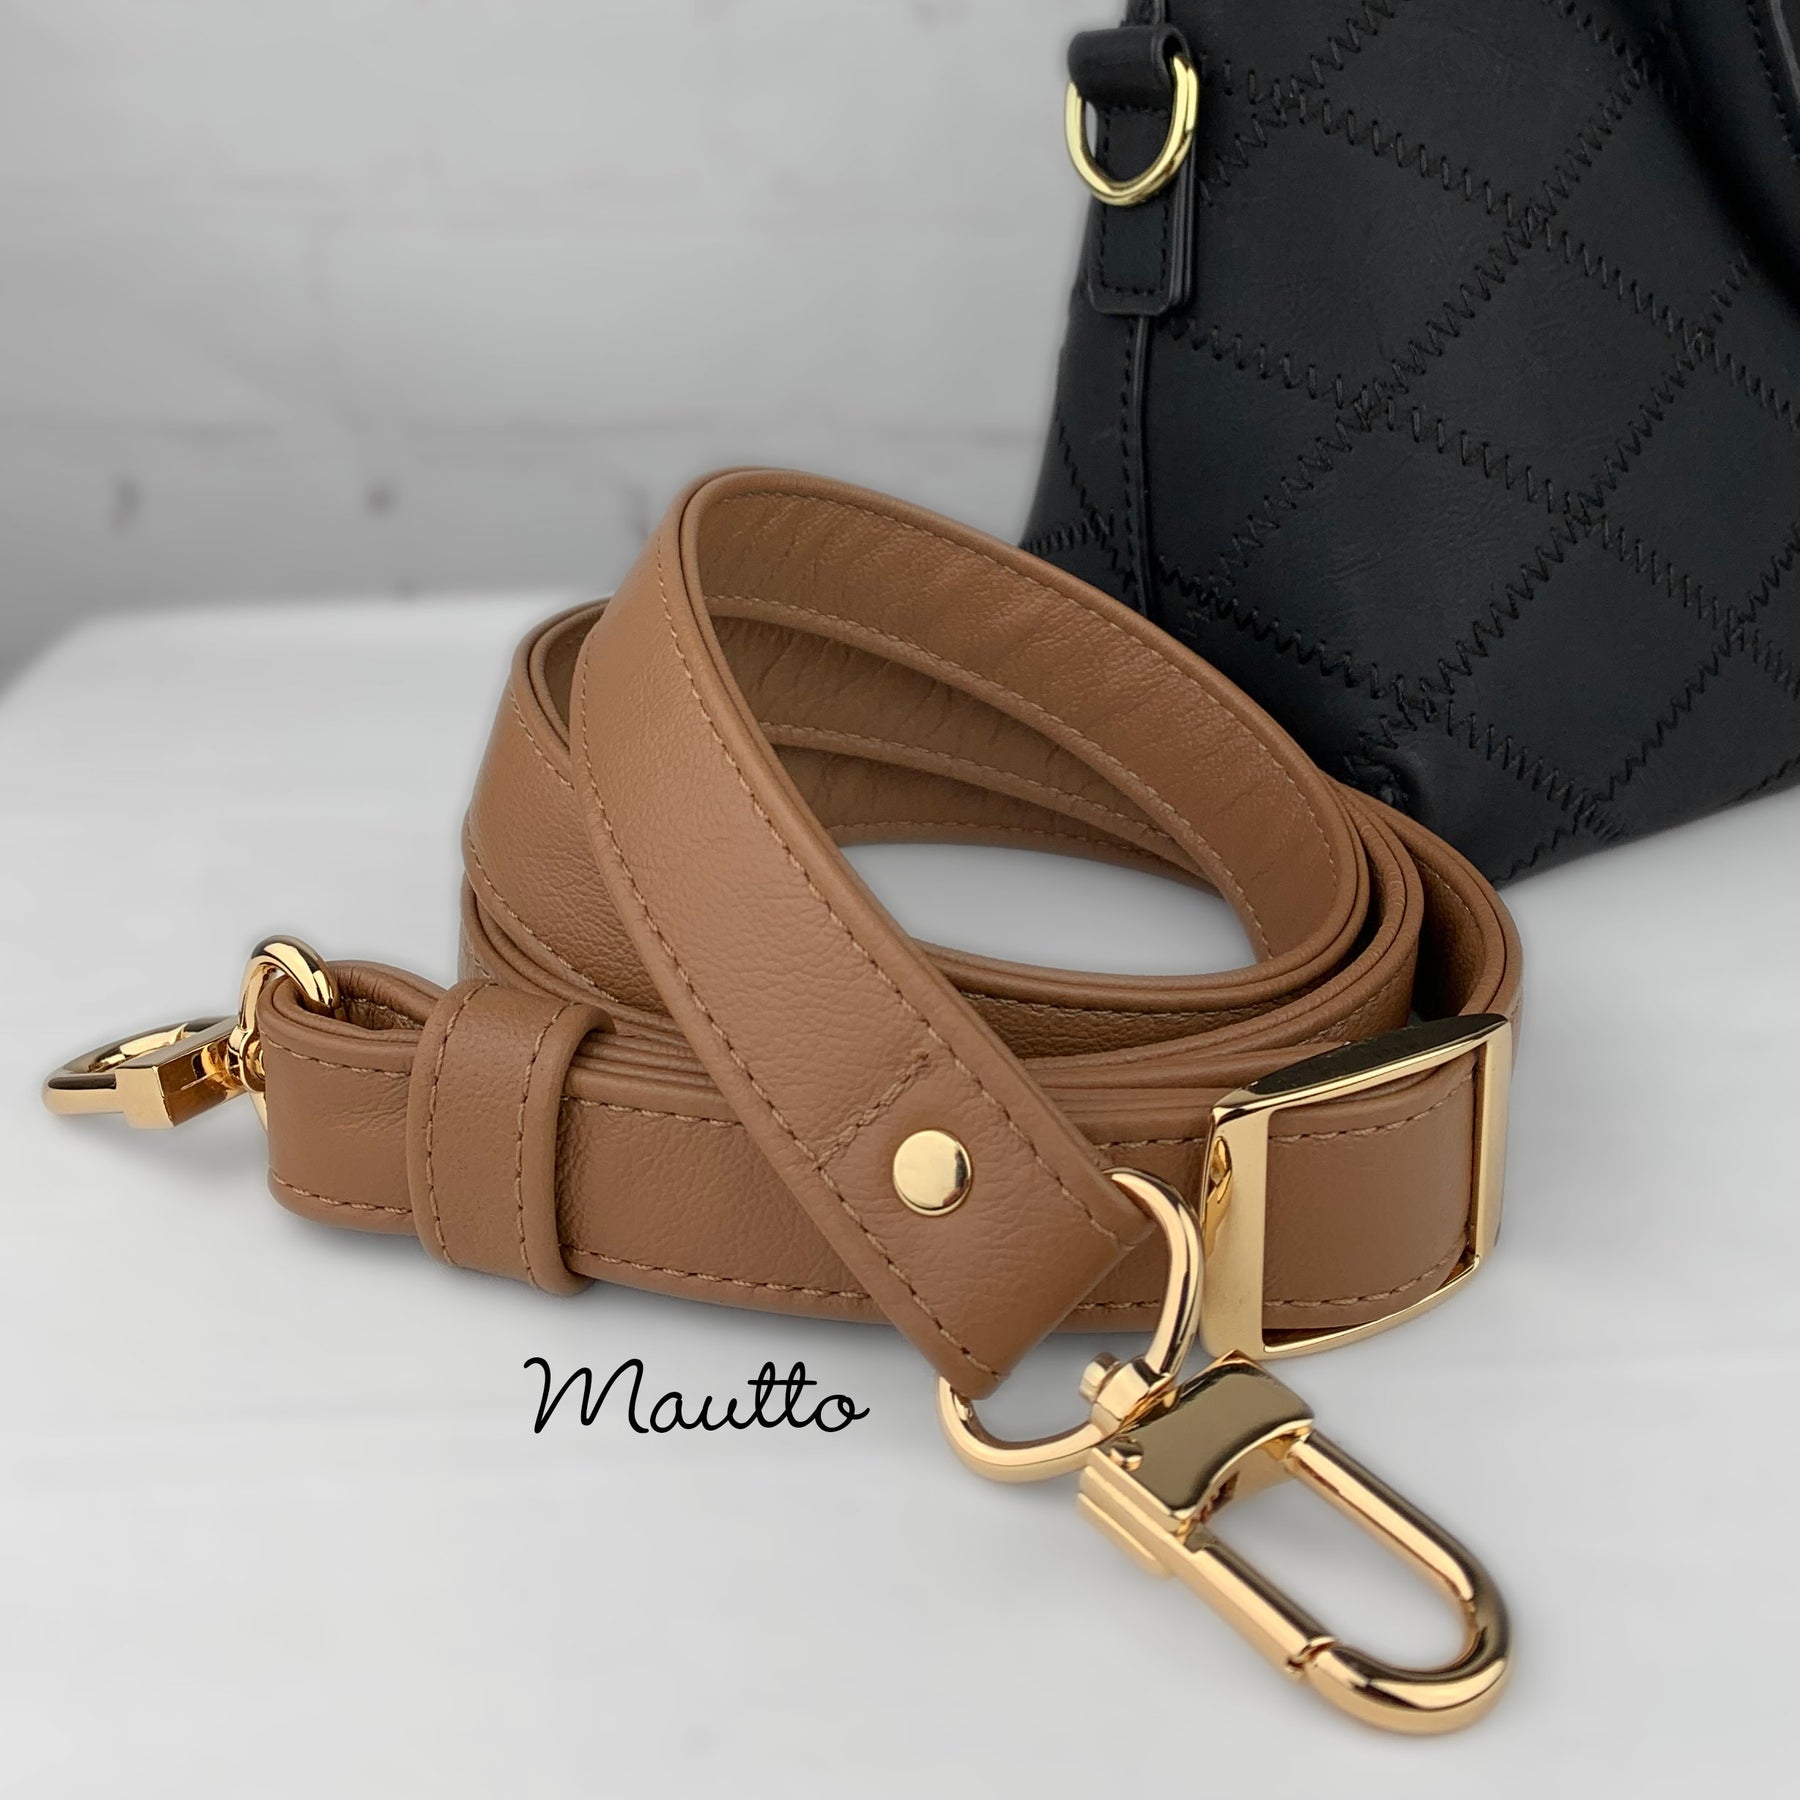 Top Handles - The Traditional Strap Style for Most Handbags - Mautto